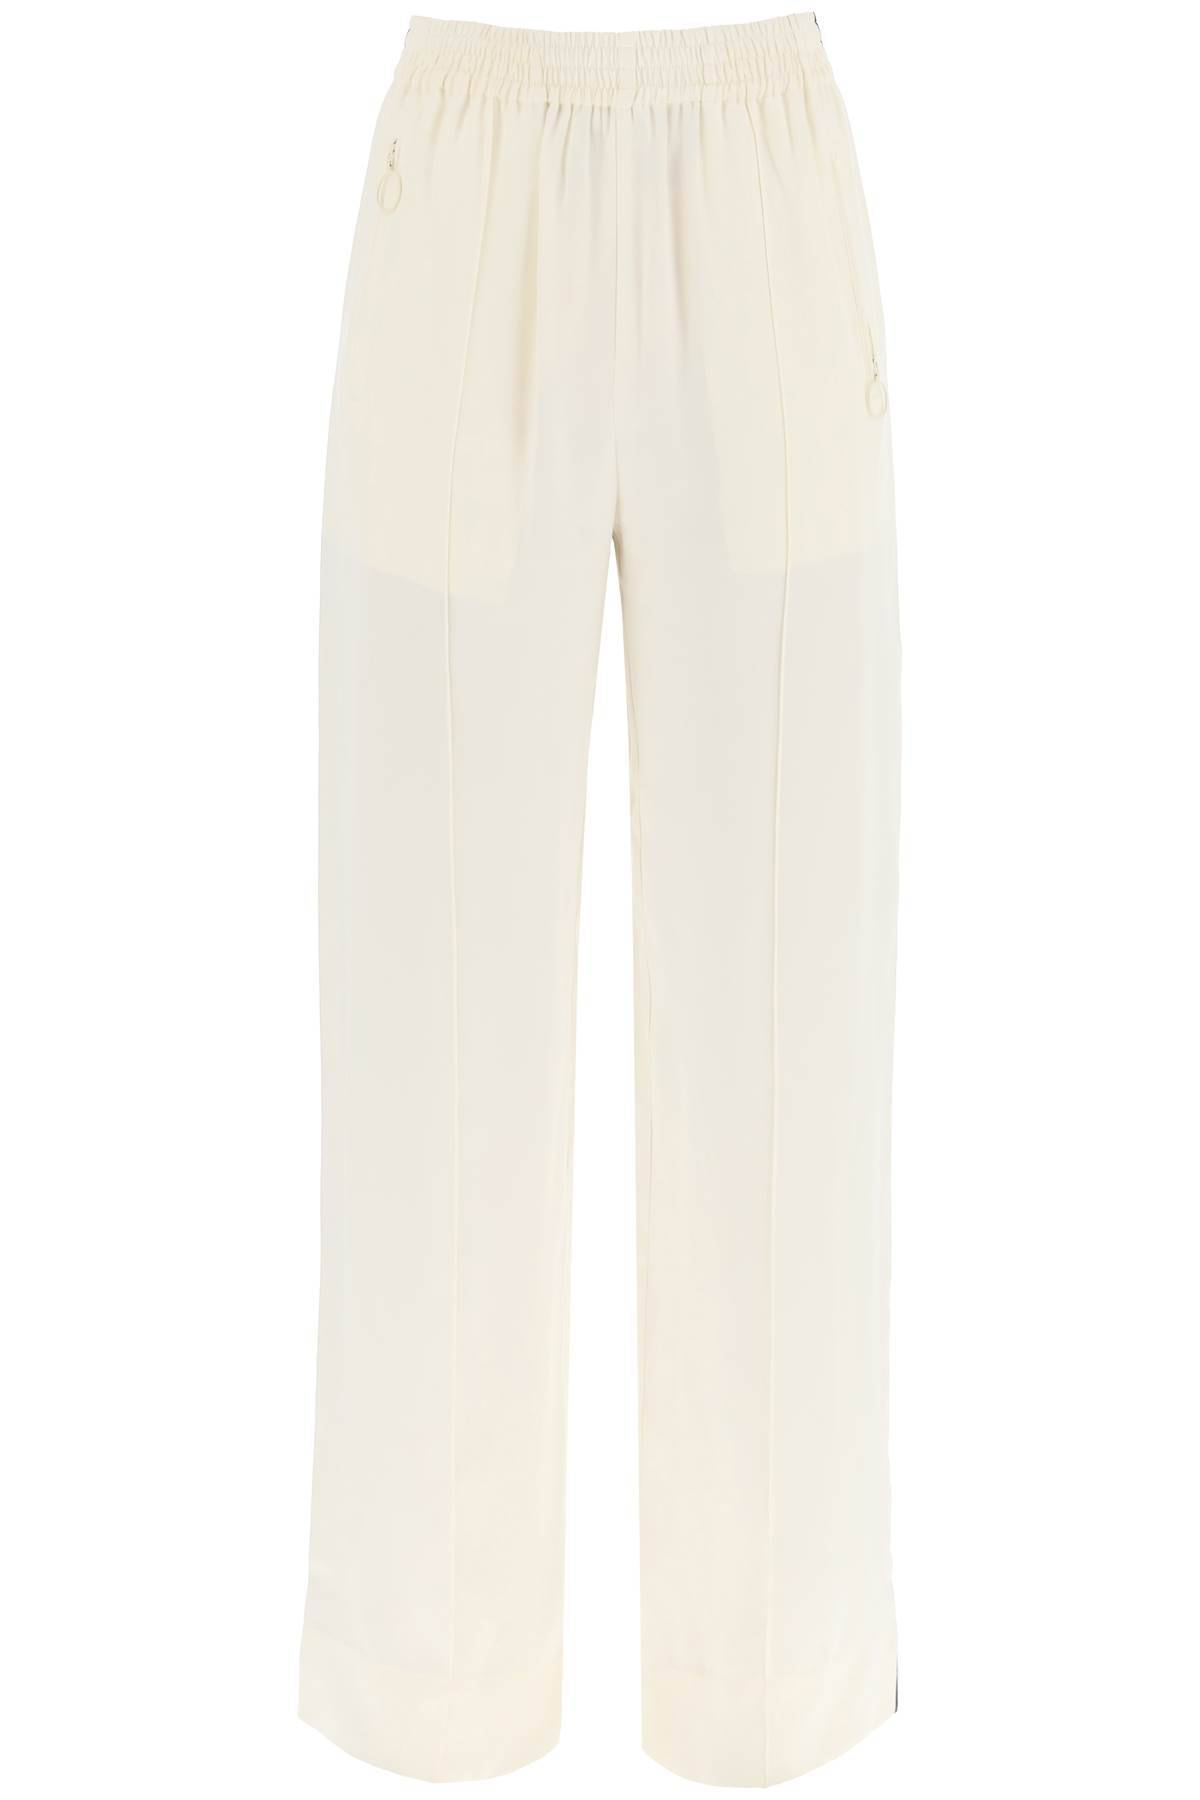 See By Chloé SEE BY CHLOE piped satin pants